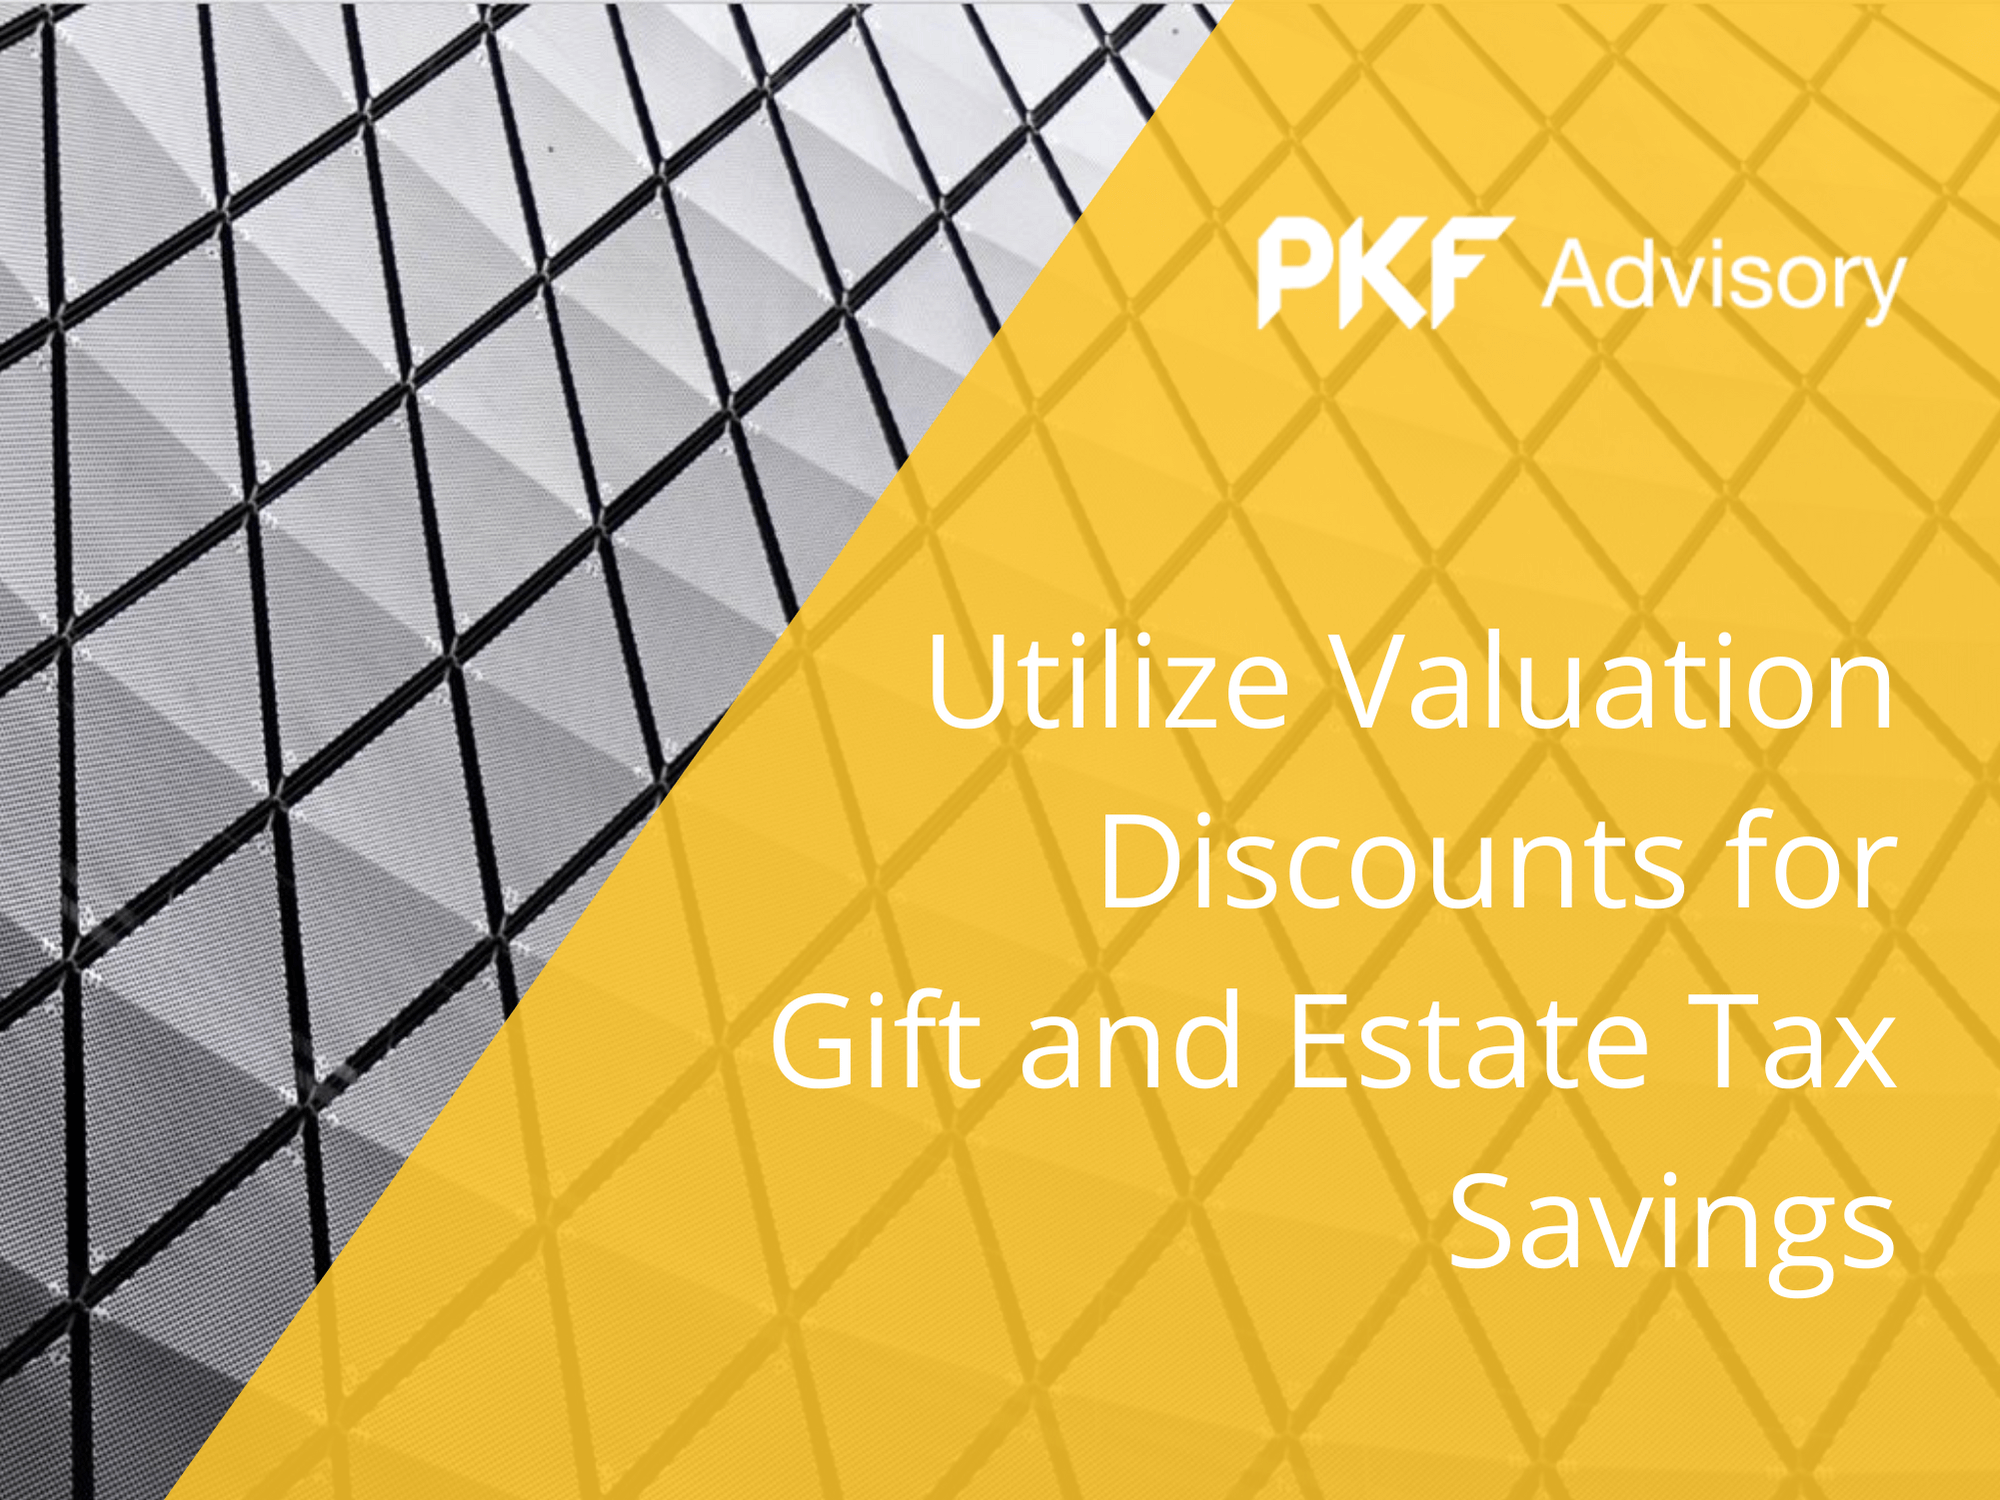 Utilize Valuation Discounts for Gift and Estate Tax Savings